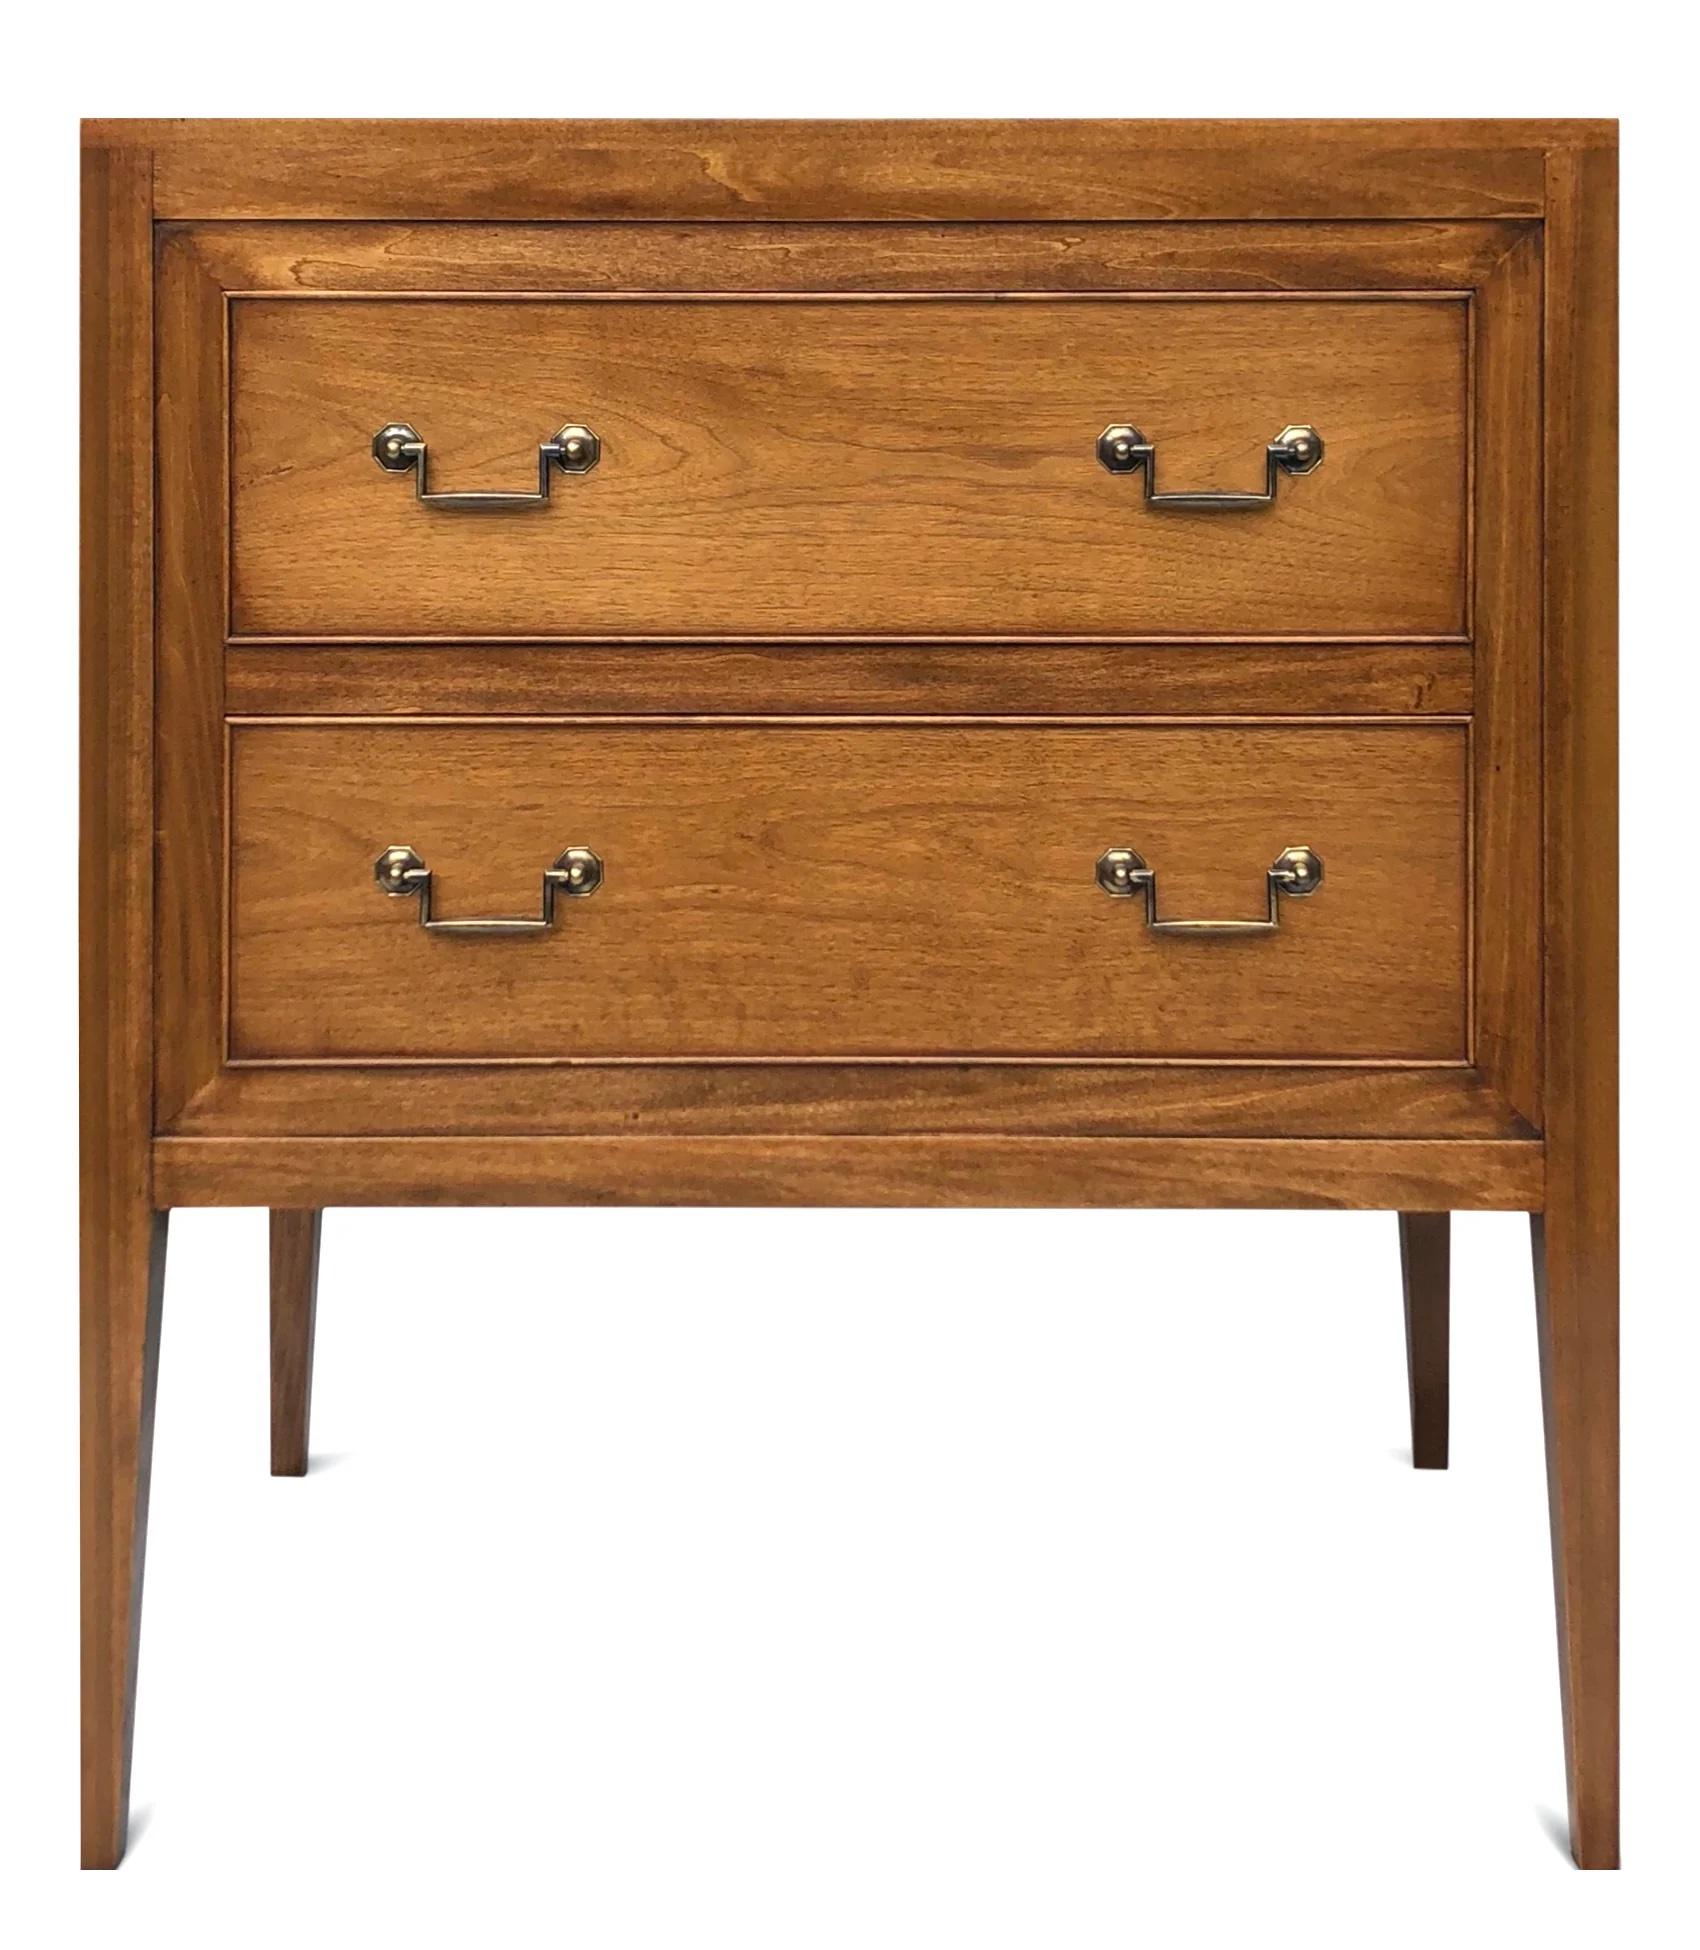 Two Drawer Chest of Drawers.
Modern design two drawer chest with simple lines, matching 'Stripey' Walnut Grained tops, Two finely Beaded drawers resting on slender tapering legs.
Made by Garners using traditional cabinetry.
 Long established Uk